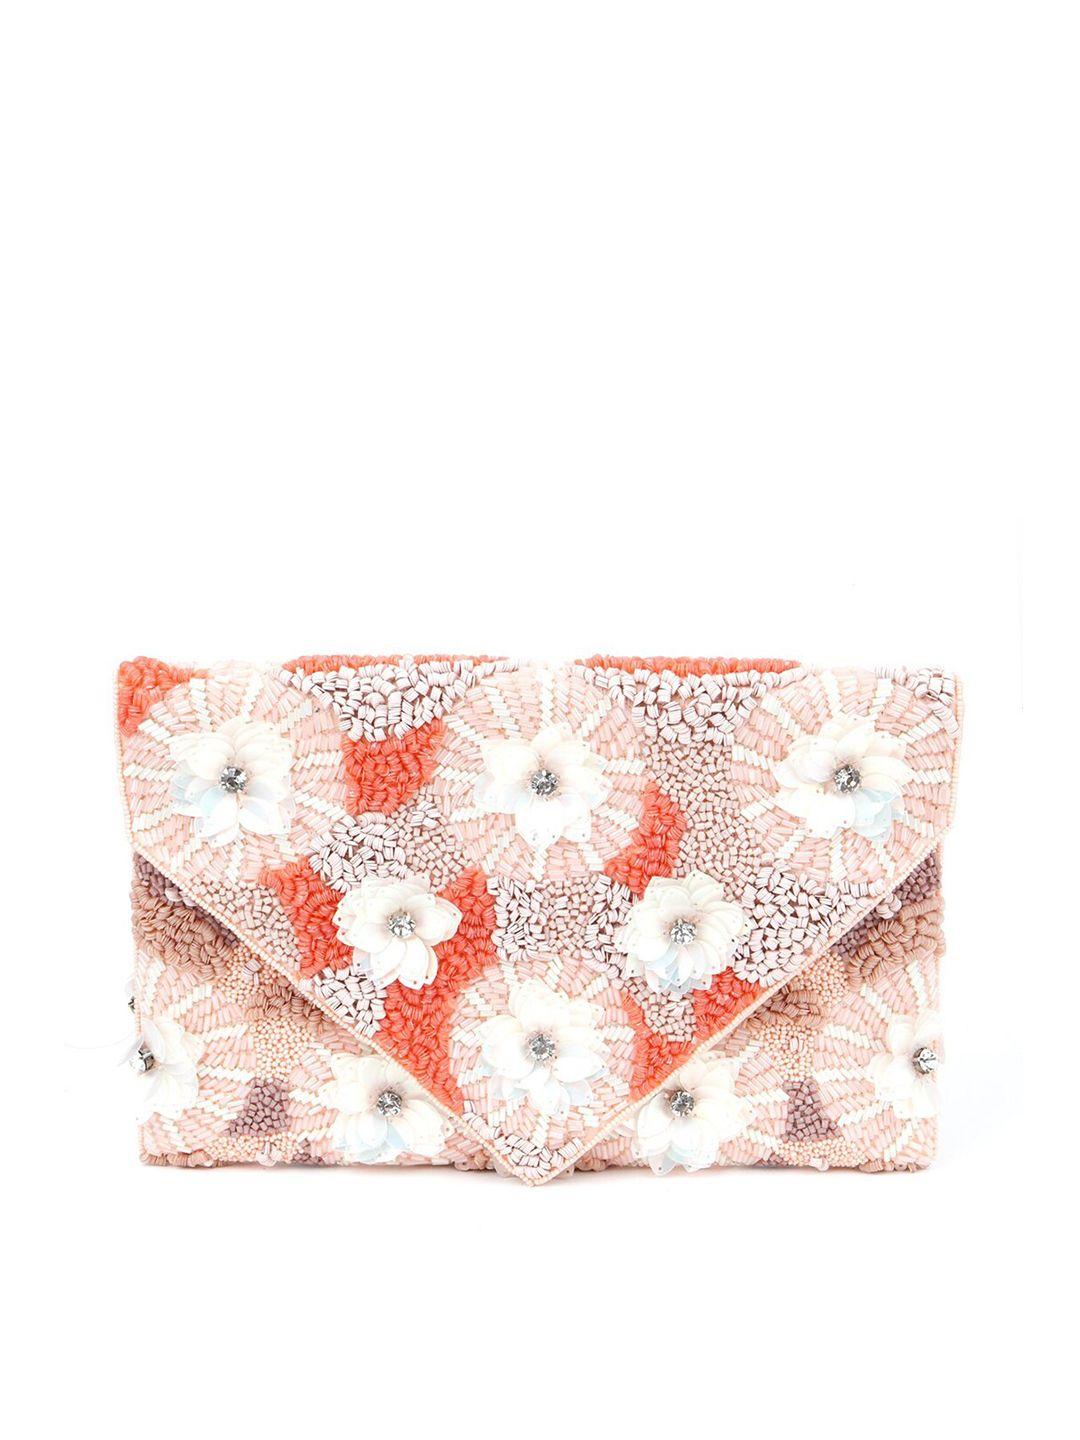 odette pink & white embellished envelope clutch with detachable silver tone strap